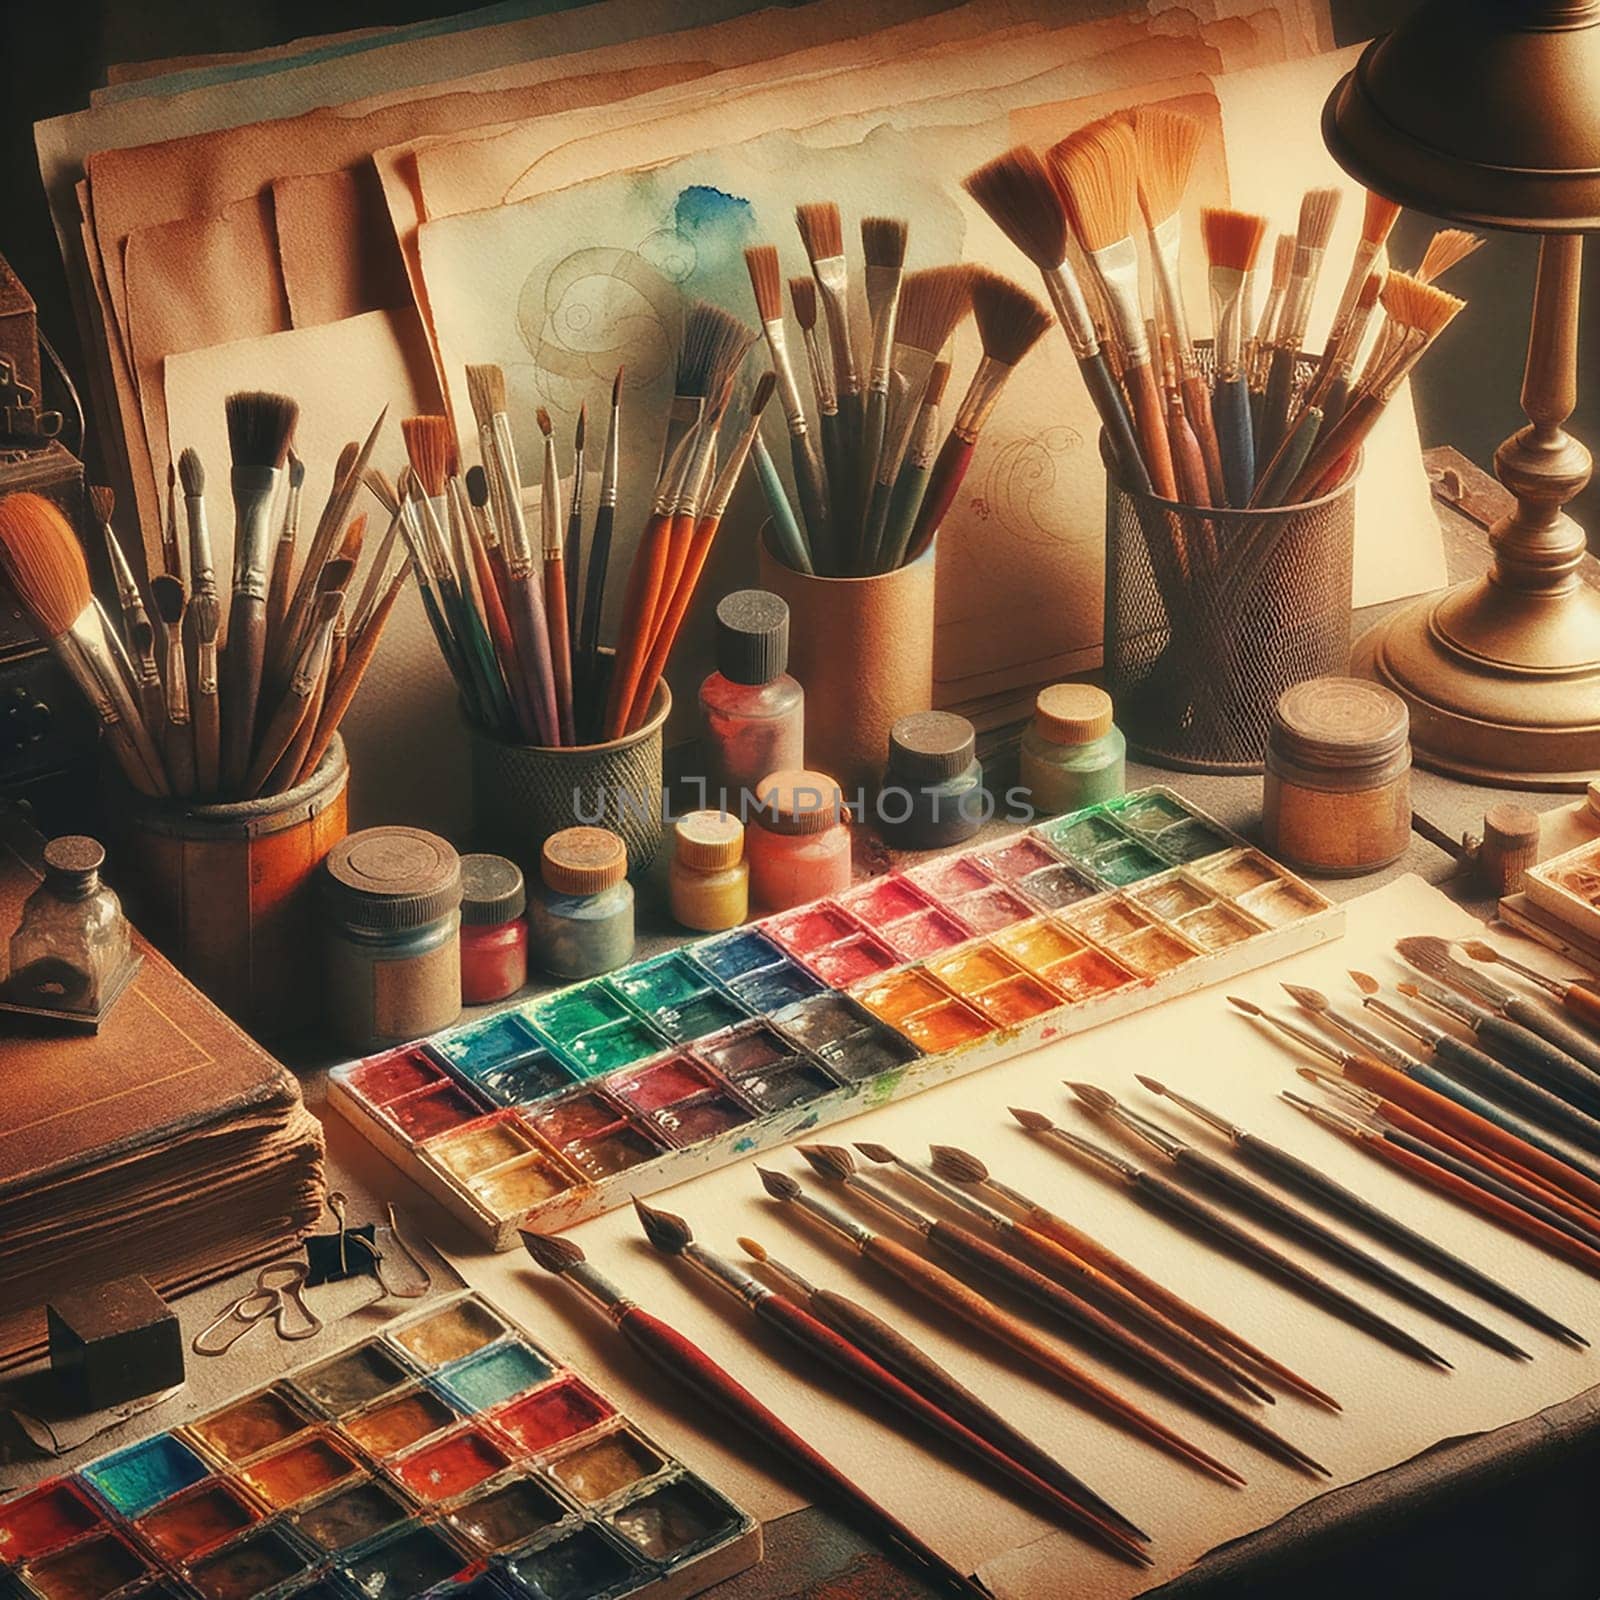 Creative Haven: Artistic Workplace Mock-up with Watercolor Supplies by Petrichor